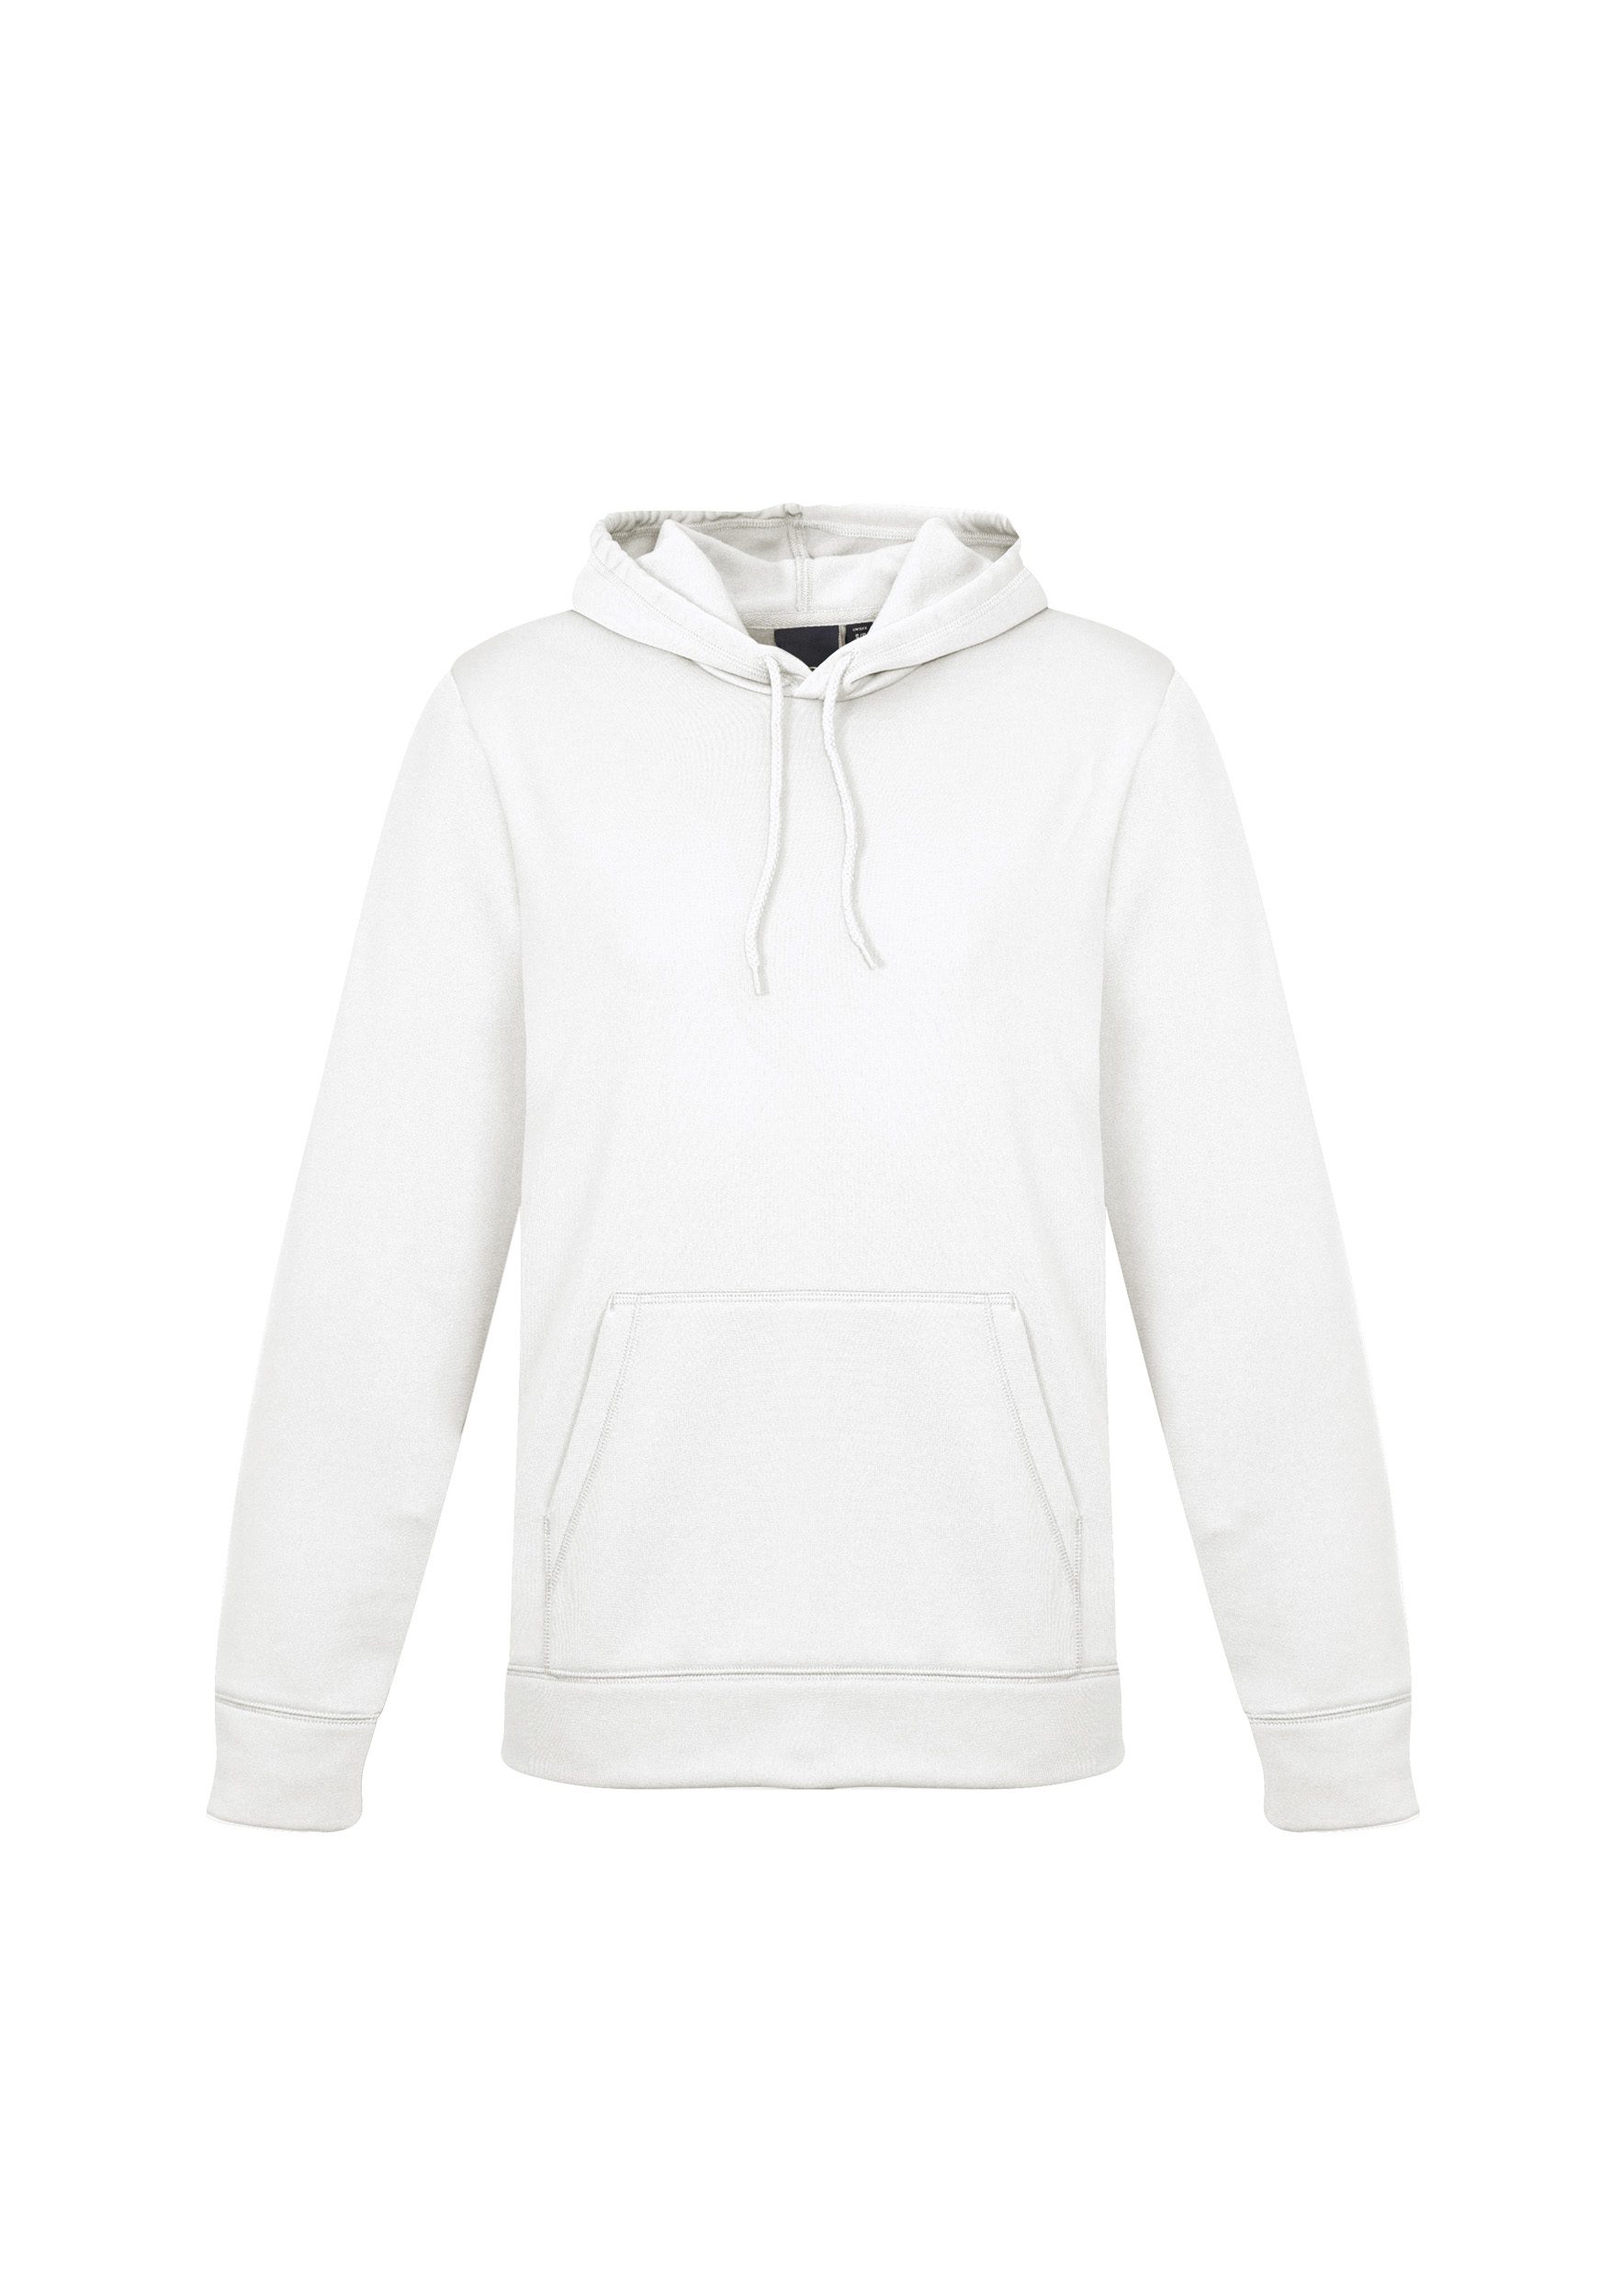 Biz Collection Ladies Hype Pull-On Hoodie #SW239LL White